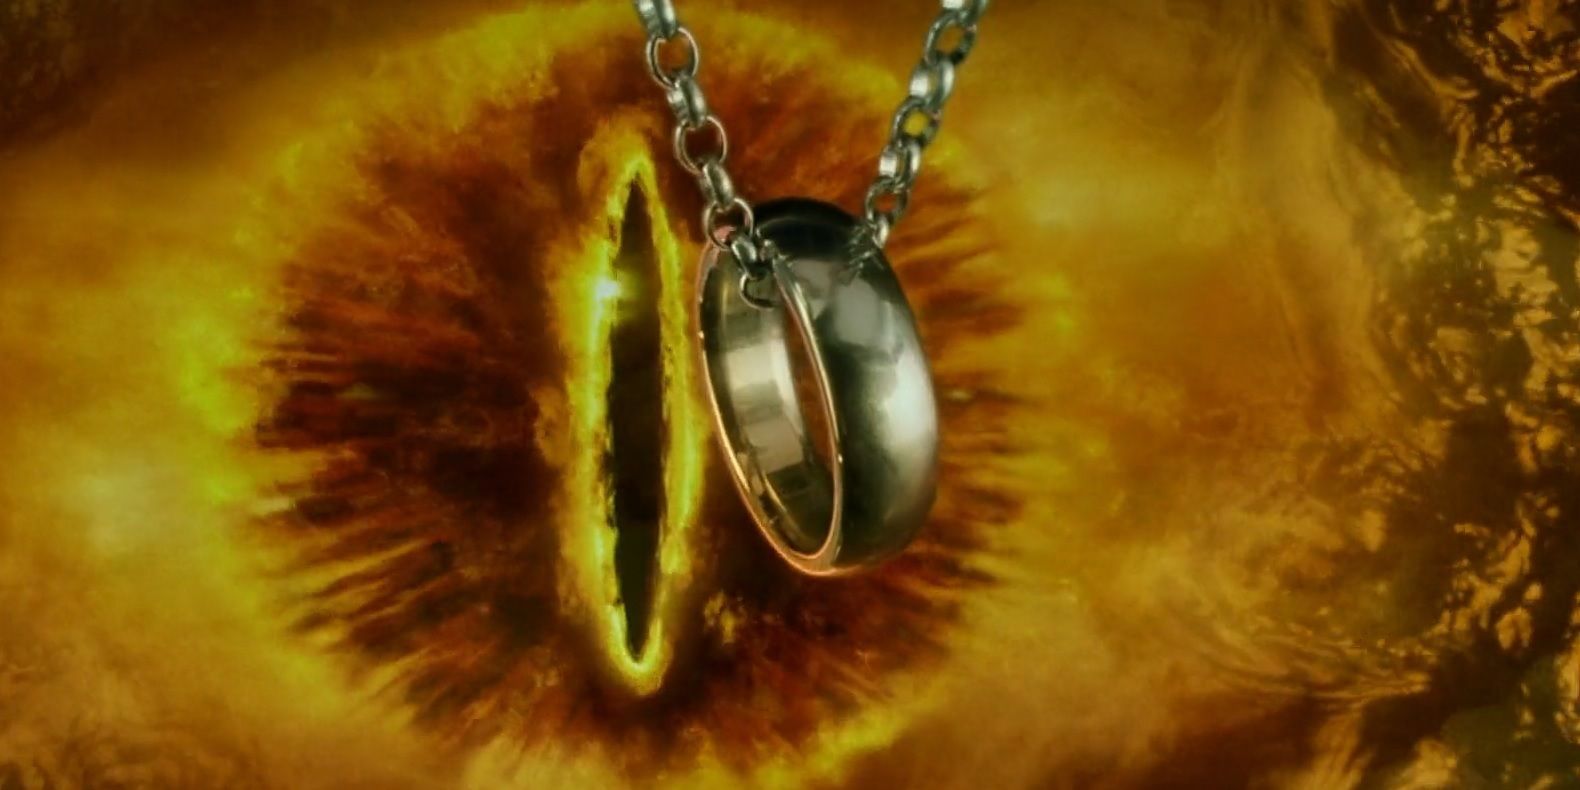 The Eye of Sauron and The One Ring